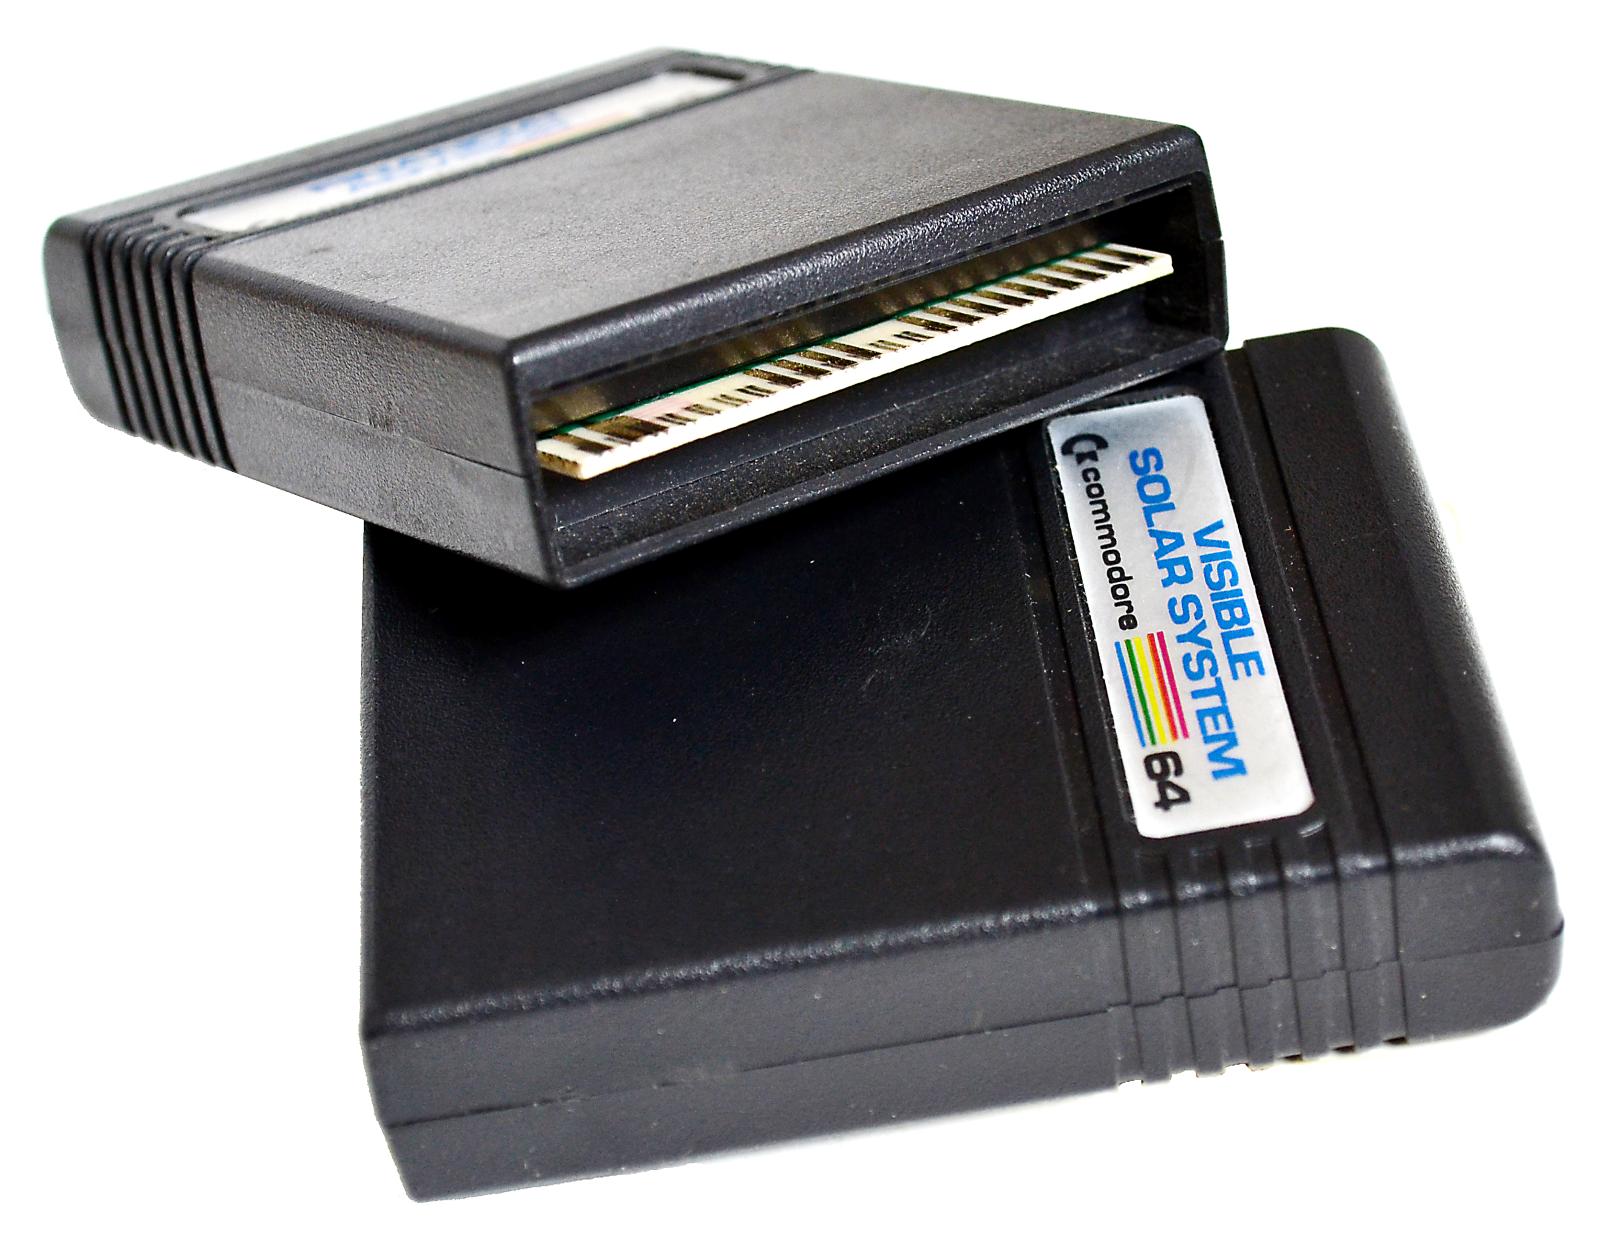 Two black oblong cartridges for use in Commodore 64. One has visible label of "Visible Solar System"